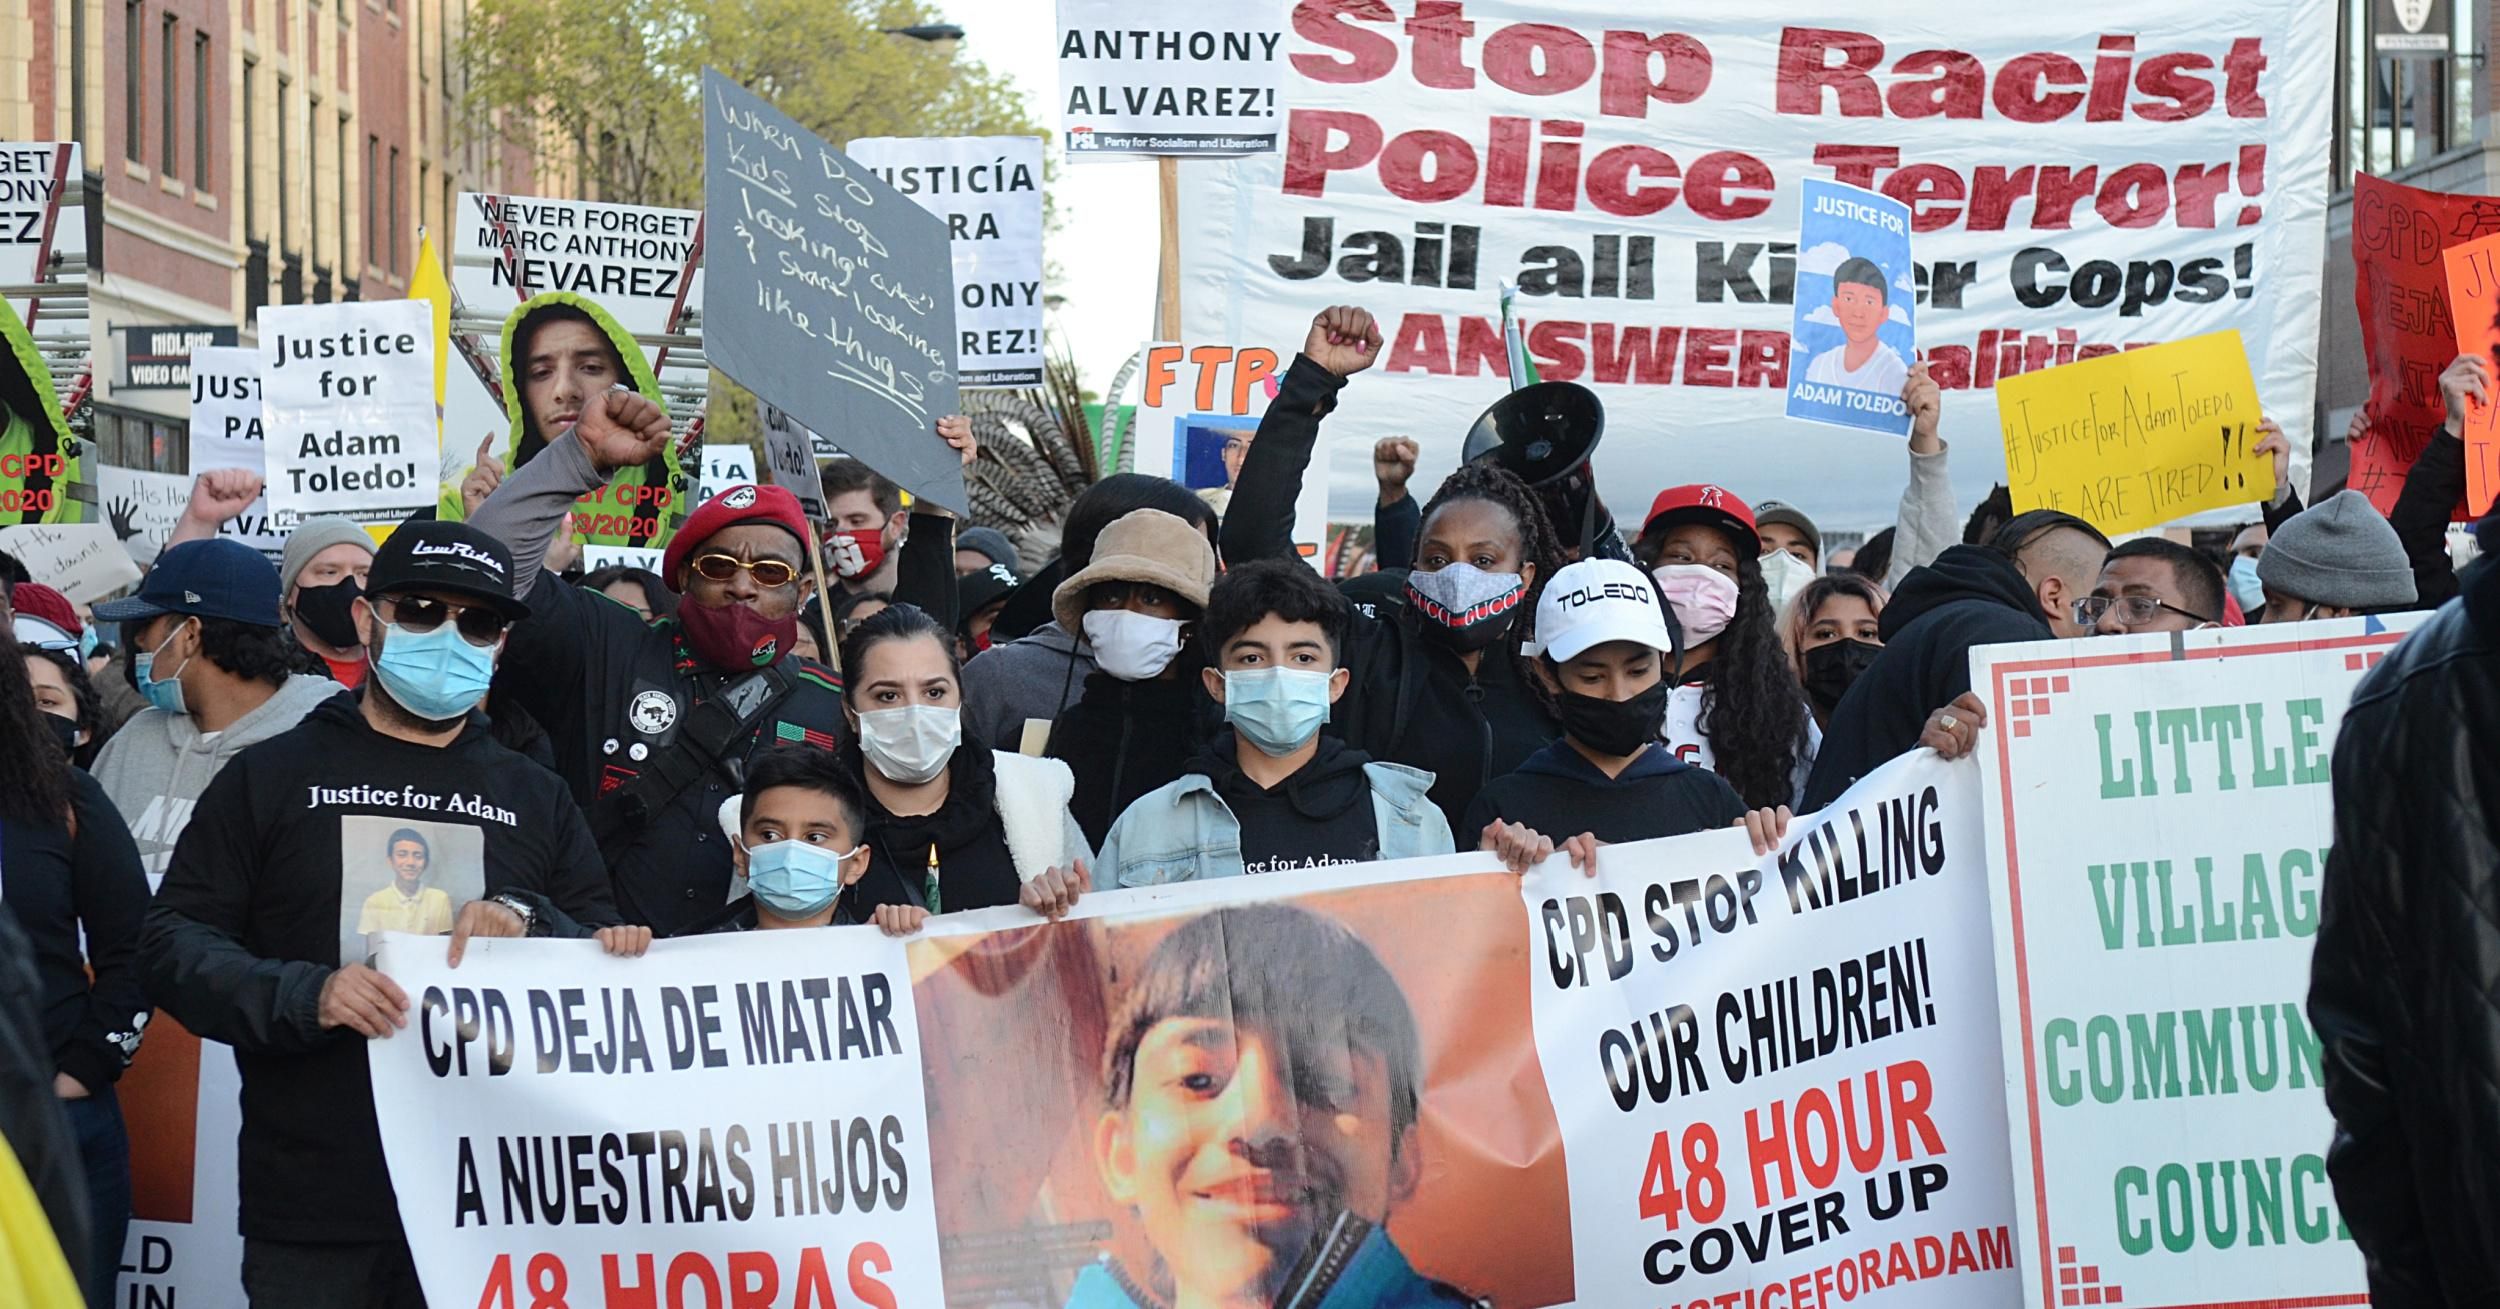 Hundreds of protesters took to Chicago's streets for 13-year-old Adam Toledo, who was shot and killed by police in March, on April 16, 2021. (Photo: Jacek Boczarski/Anadolu Agency via Getty Images)